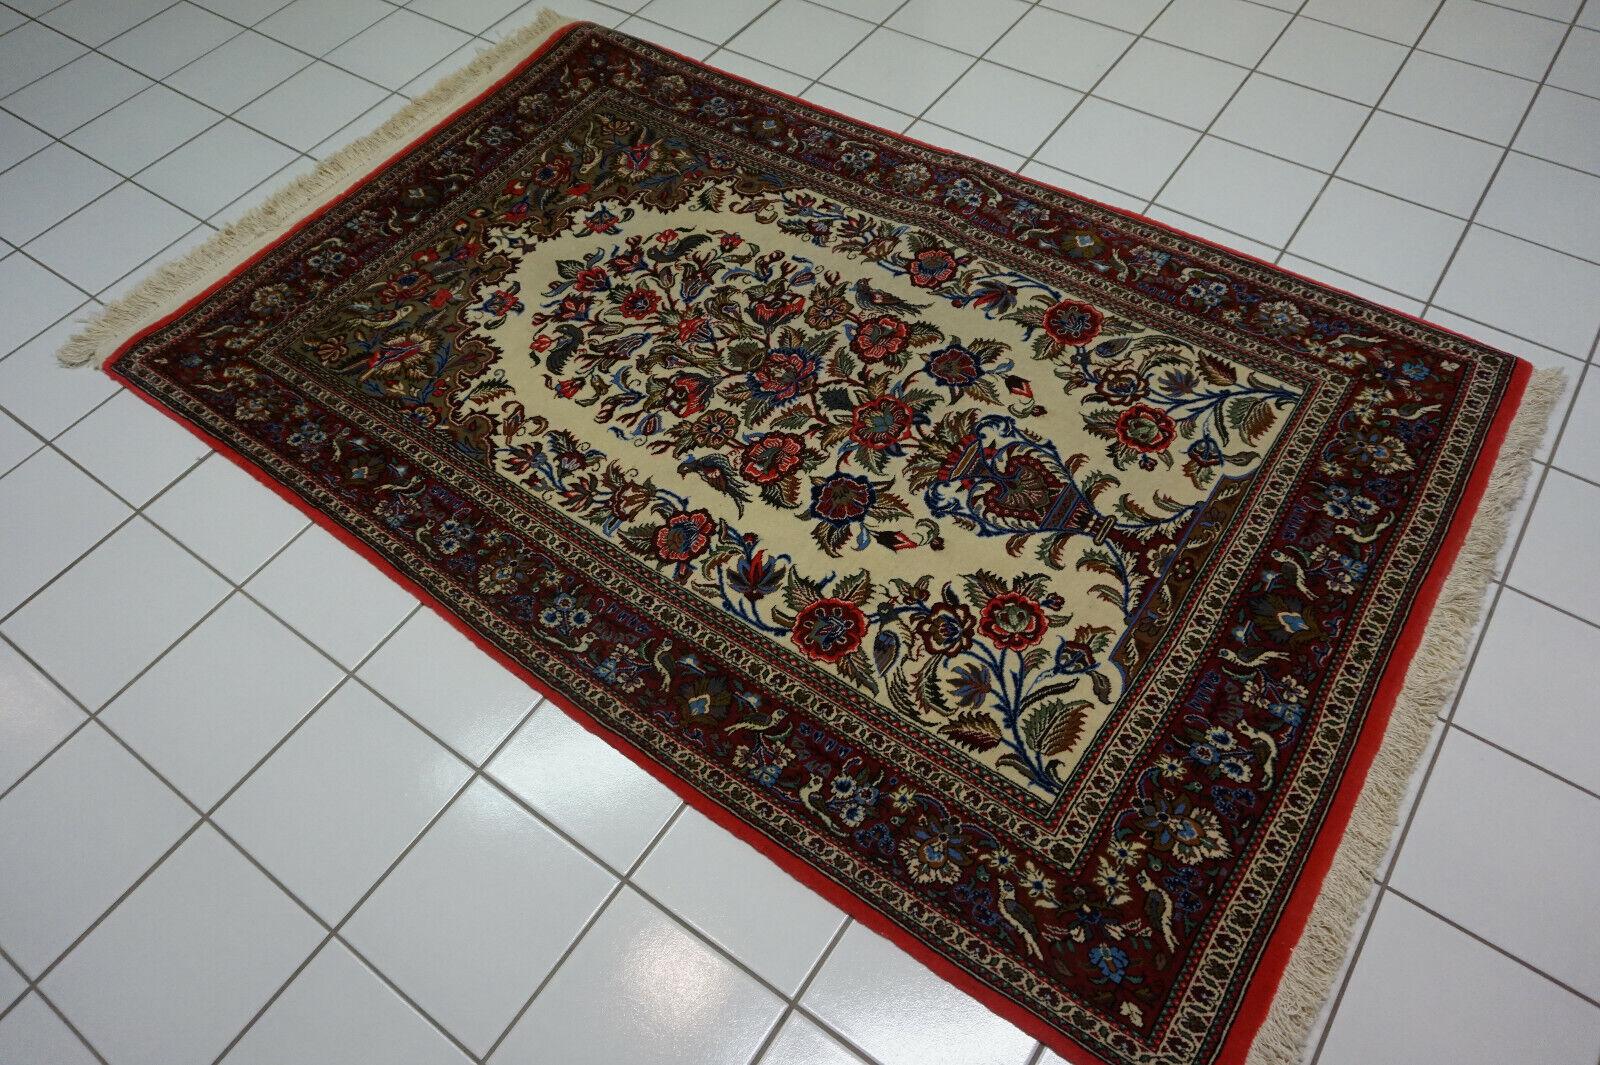 Handmade Vintage Persian Style Qum Rug

This handmade vintage Persian style Qum rug is a stunning piece of decor that will add a touch of elegance and spirituality to your home. Made in the 1970s from wool, this rug features a central oval pattern